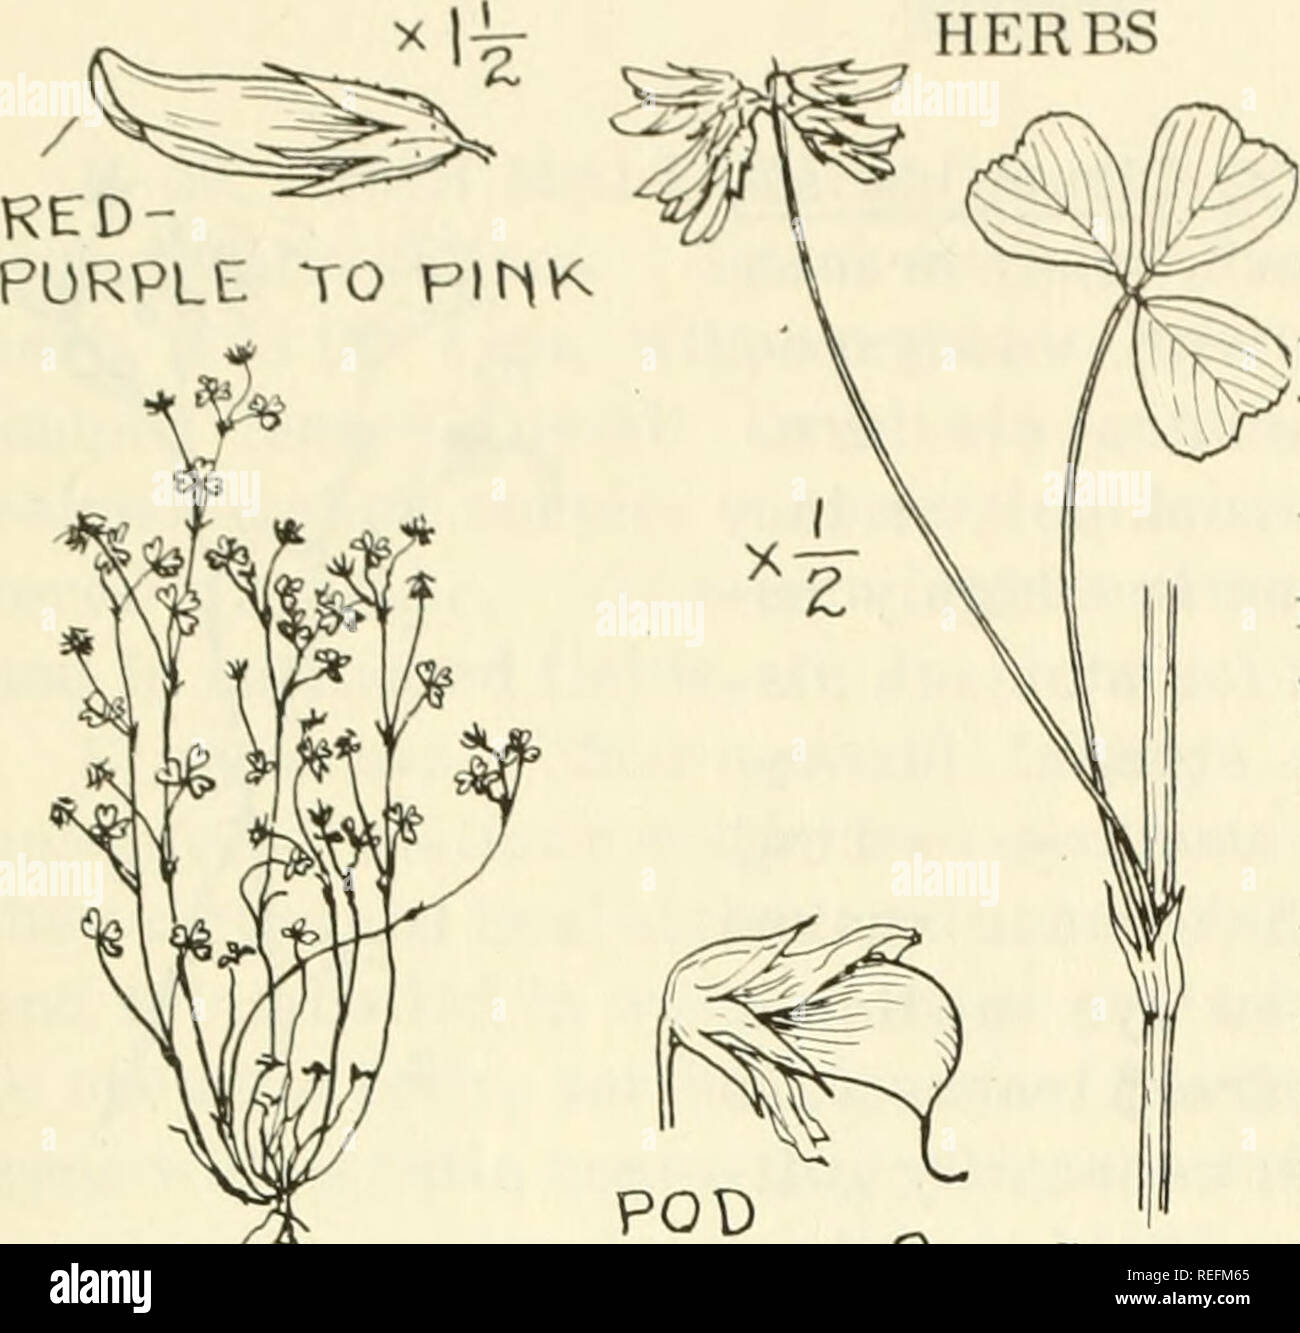 . Common edible and useful plants of the West. Plants, Edible -- West (U. S. ); Botany, Economic; Botany -- West (U. S. ). HERBS 43 H-21. WILD CLOVER, Trilolium sp. (T. graci- lentum, Pinpoint Clover, illustrated). Small herbs with typical 3 leaflets and flowers yellow, white or purple in heads or short spikes; stamen2-grouped. In Scotland, bread was made from the White Clov- er (To repens), and the pioneers made clover tea, brewing dried flower 5'1-2q'&quot; ^J x2. £/^ heads. Indians ate it raw or steamed and the steamed plant was dried for winter use. White clover was not cooked, but eaten r Stock Photo